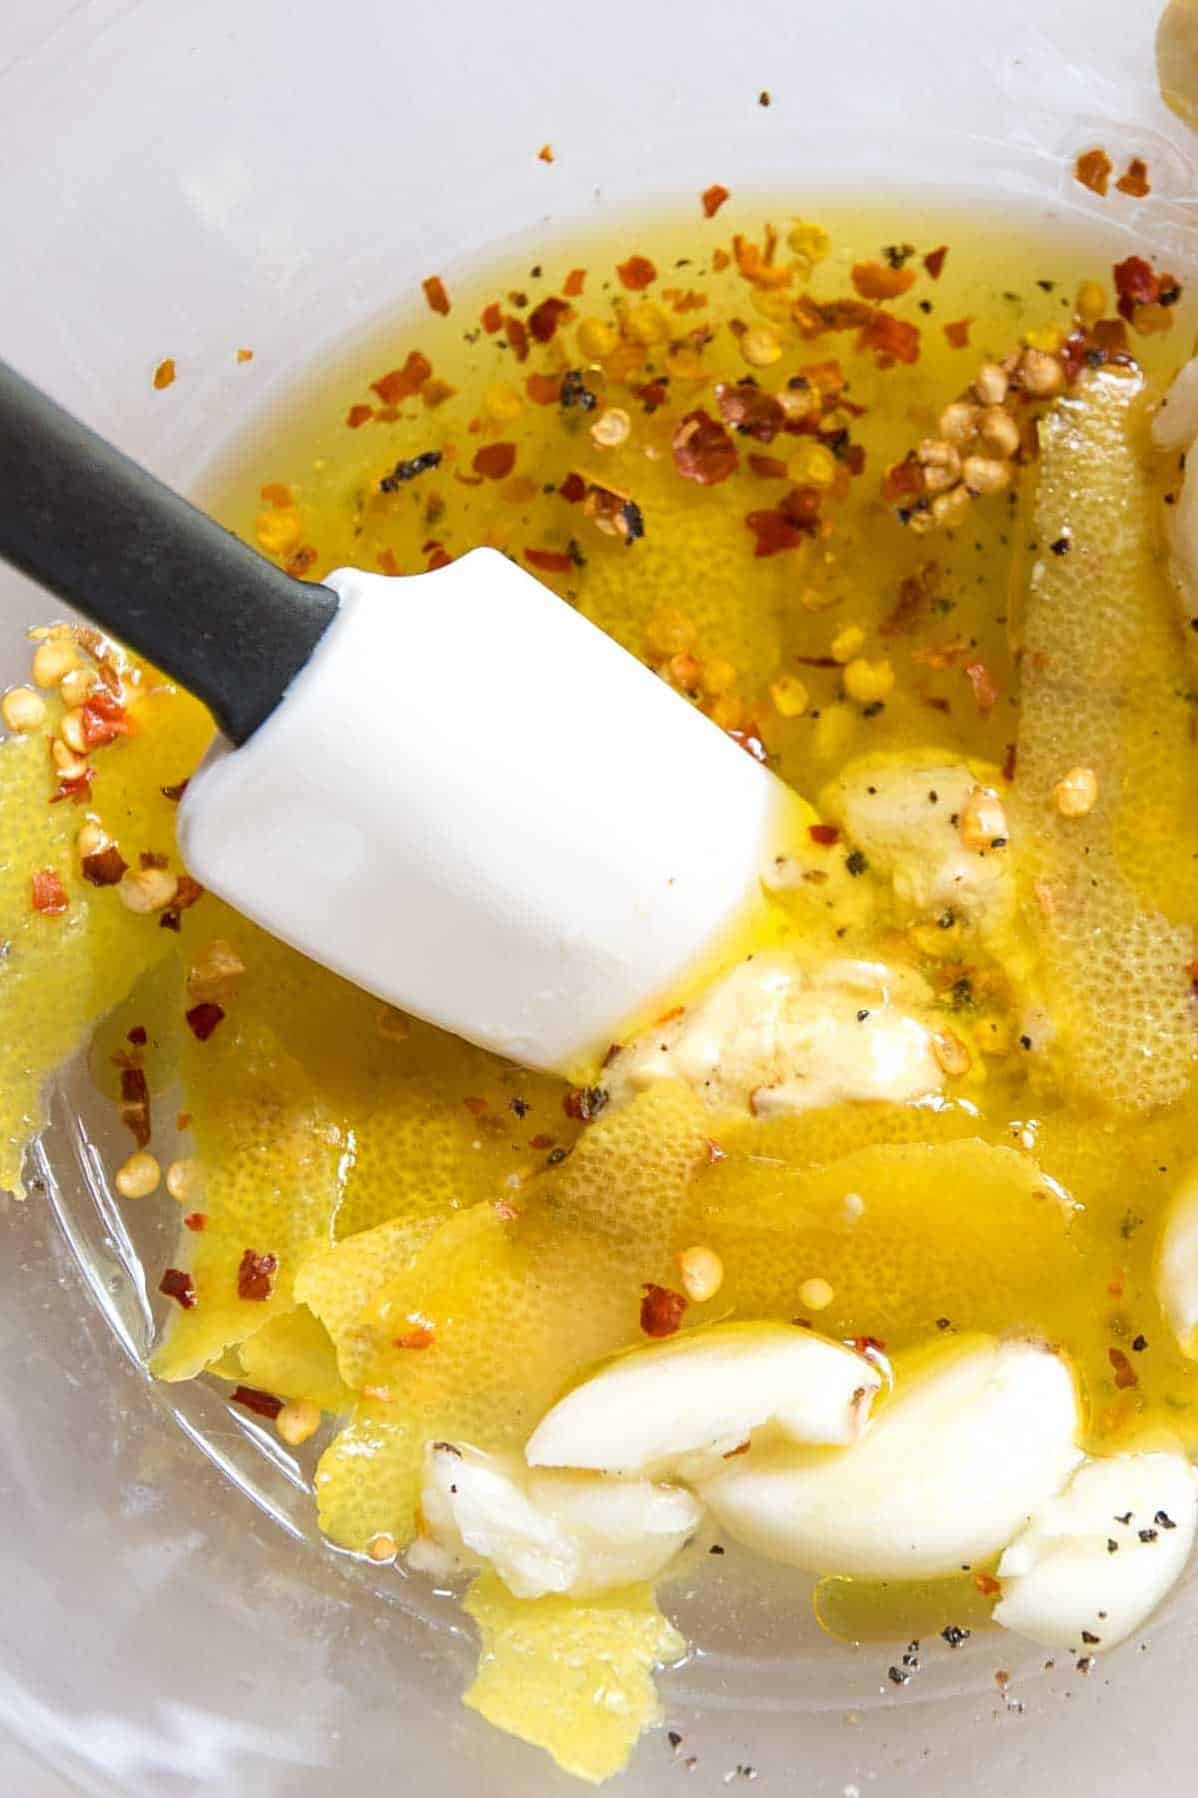  Impress your guests with this delicious and simple-to-make marinade.